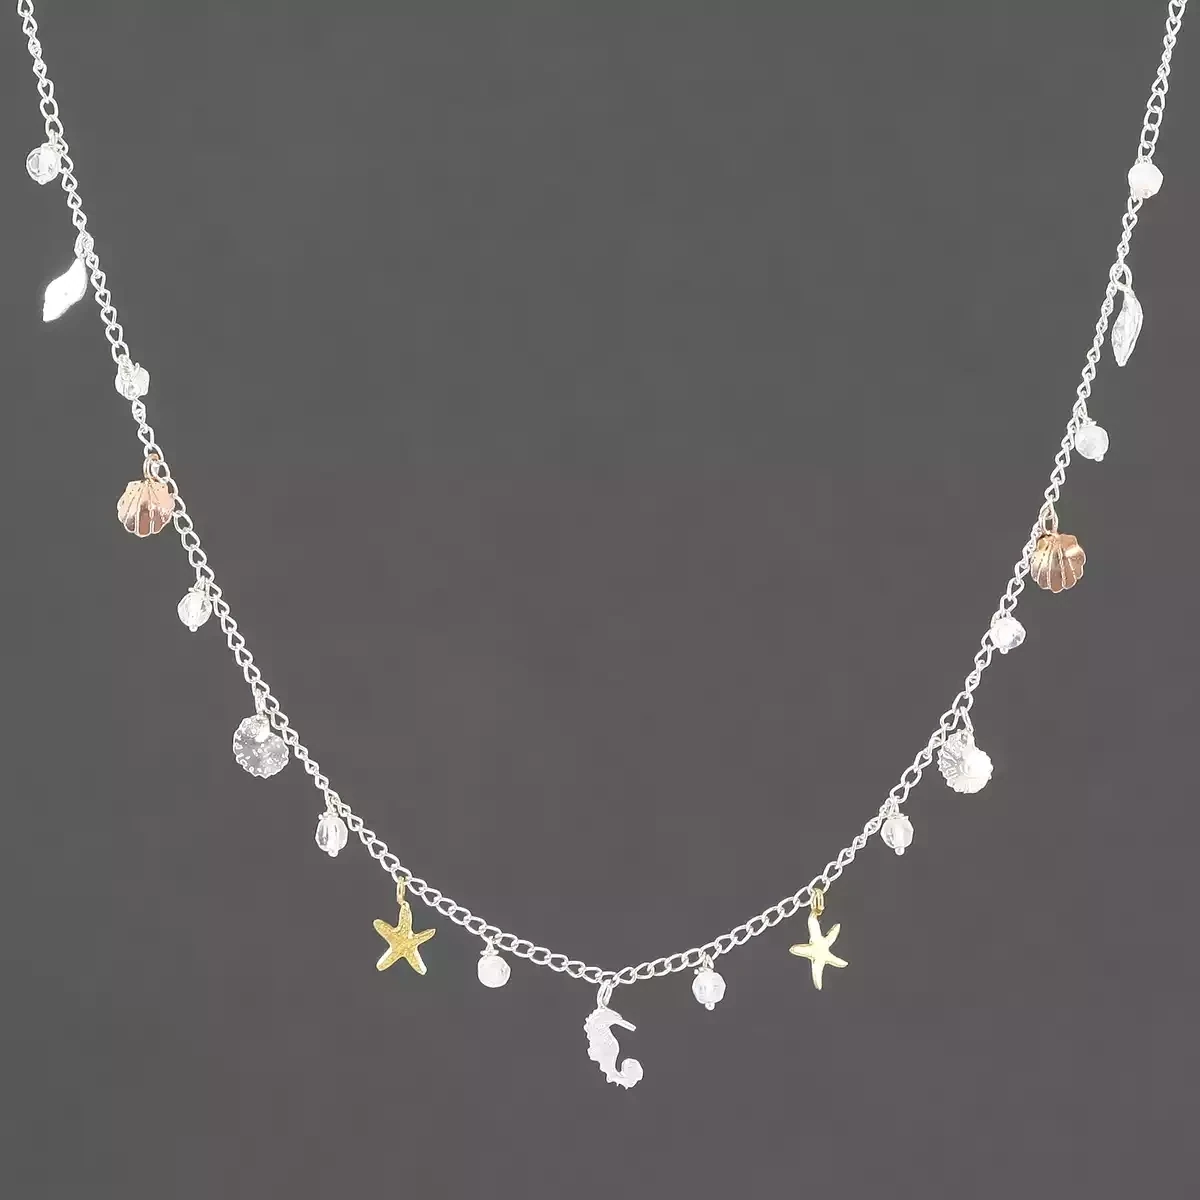 Sea Mix With Silver, Gold Plate and Moonstones Necklace by Amanda Coleman